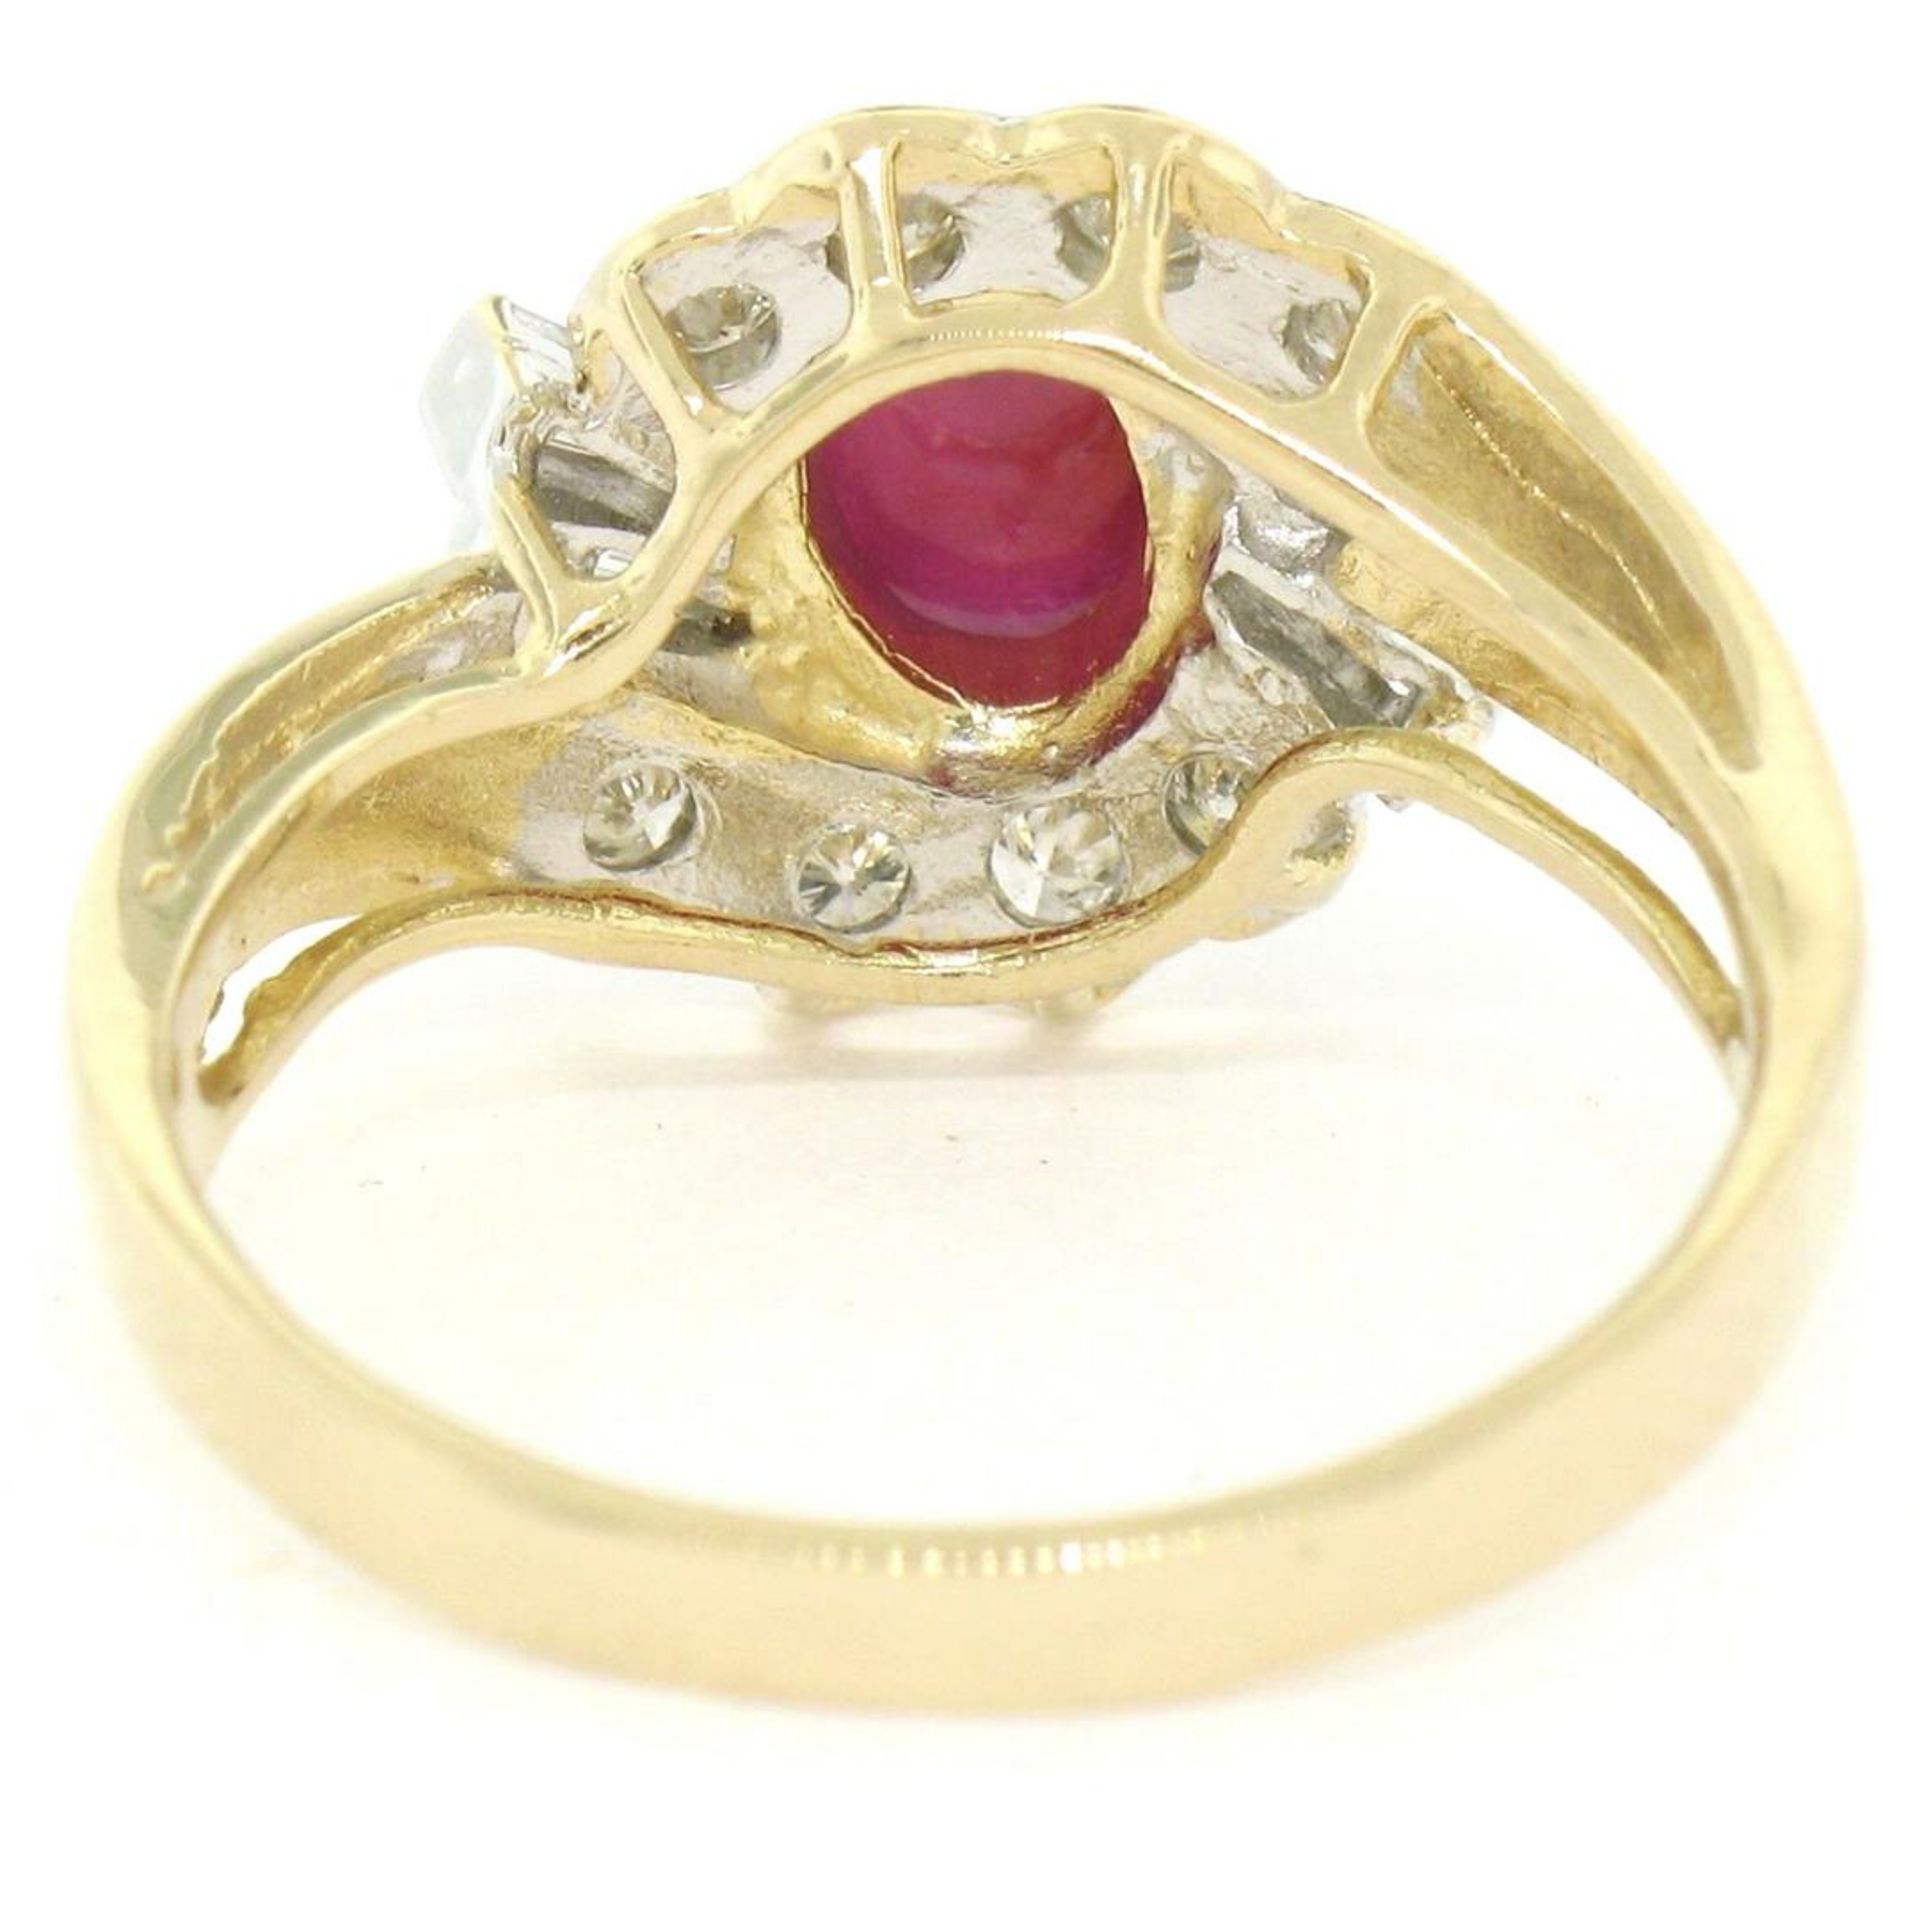 14kt White and Yellow Gold Cabochon Ruby and Diamond Ring - Image 4 of 7